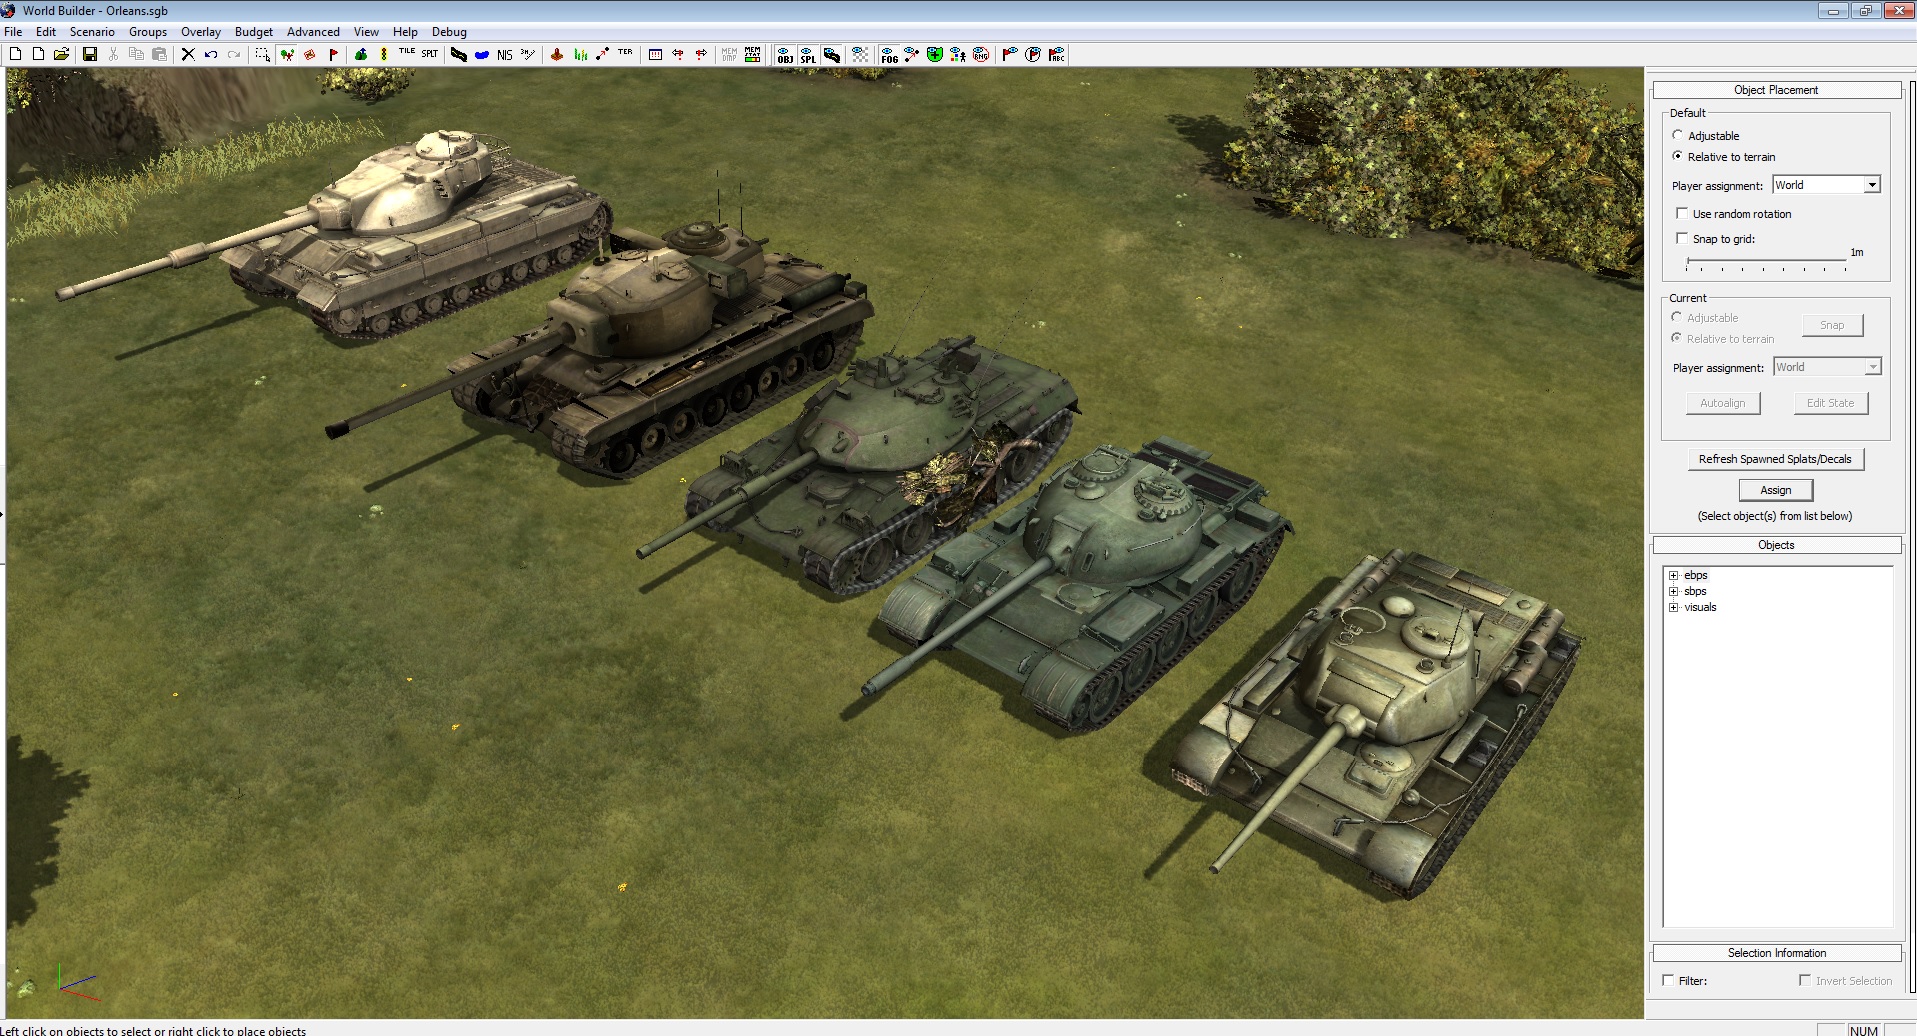 company of heroes tank quotes